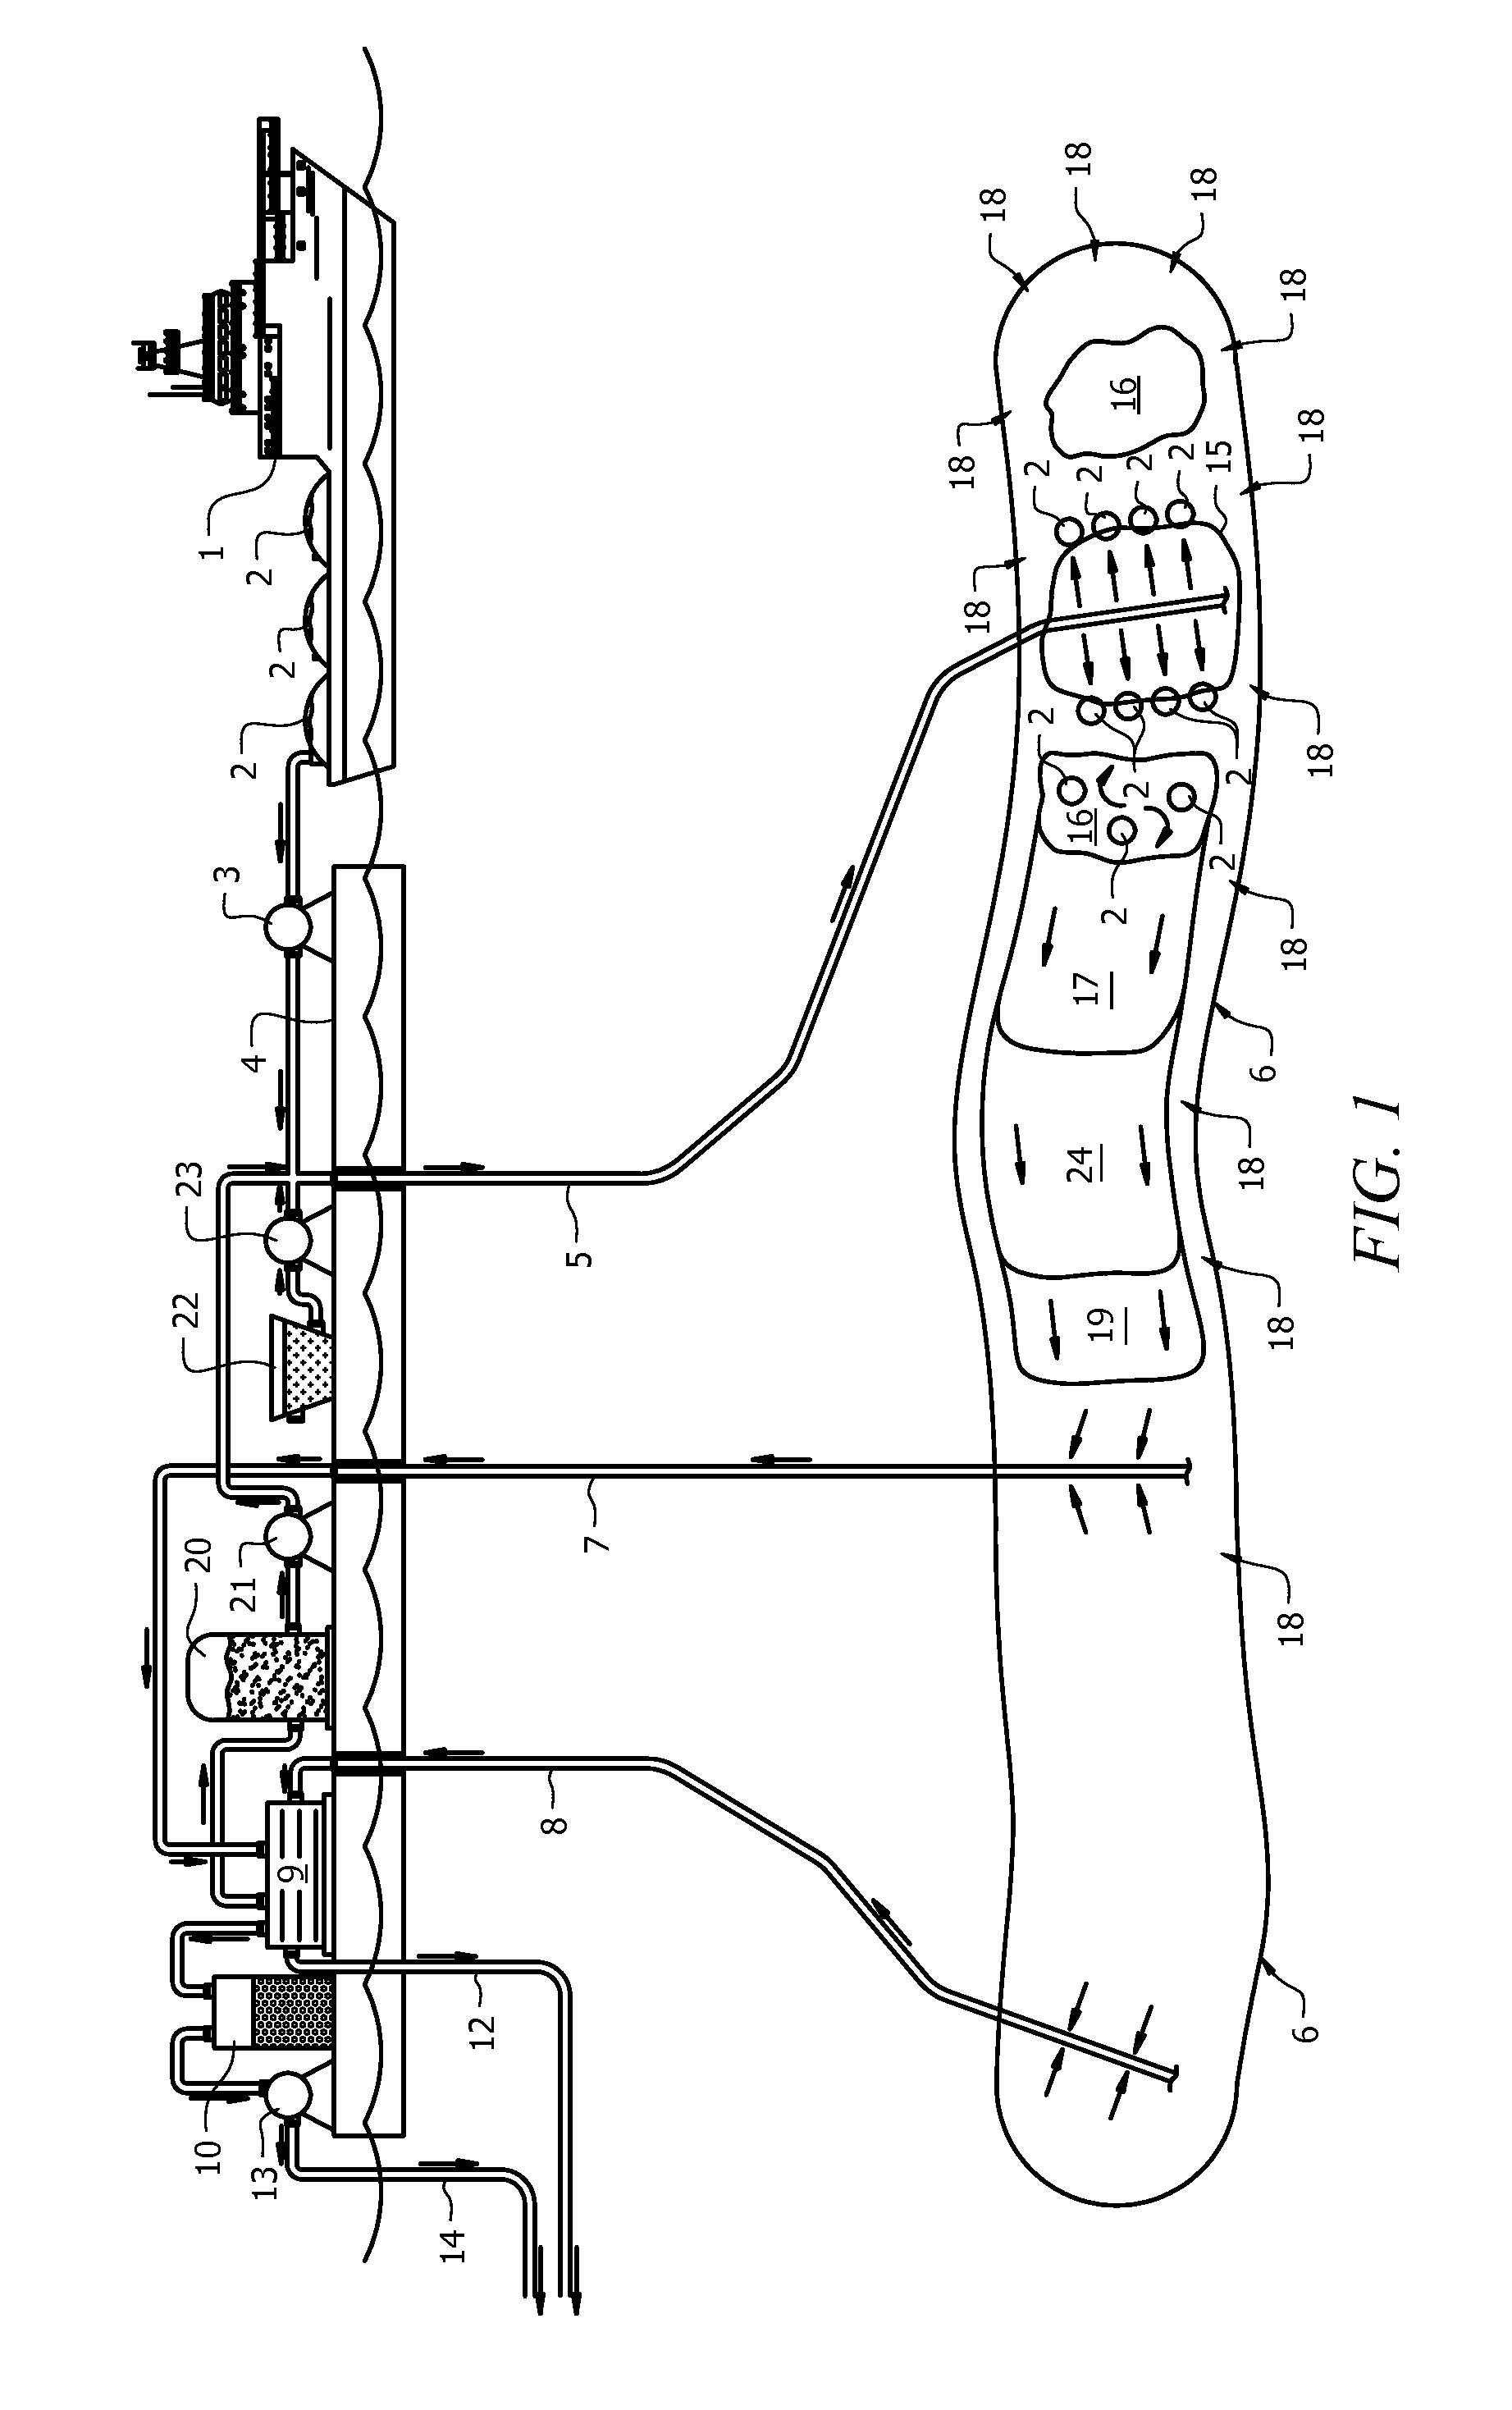 Method and apparatus to enhance oil recovery in wells